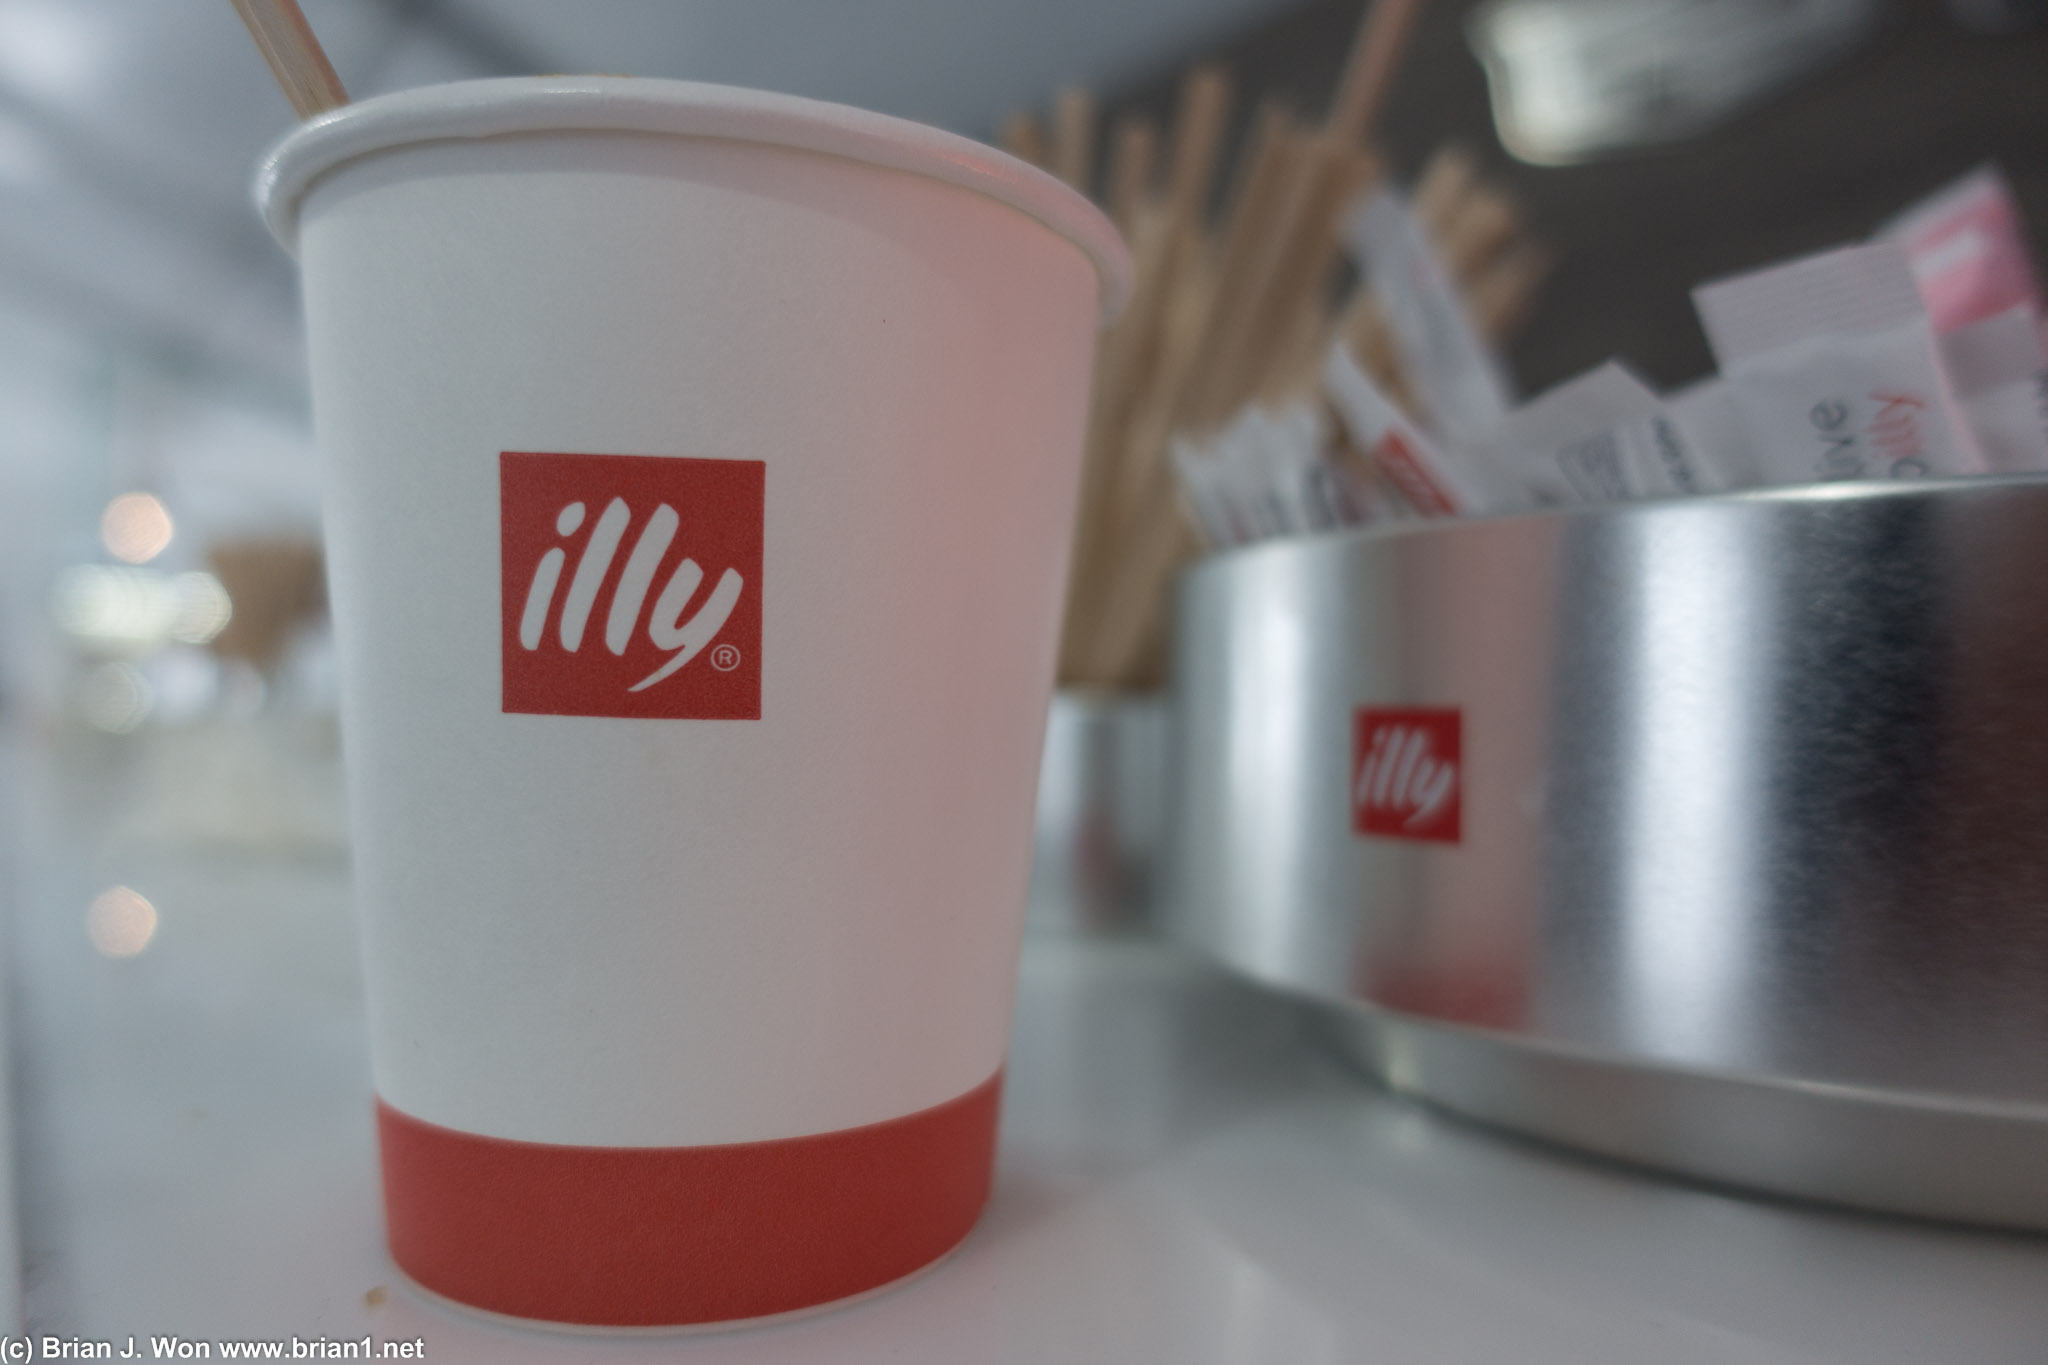 illy drinks.